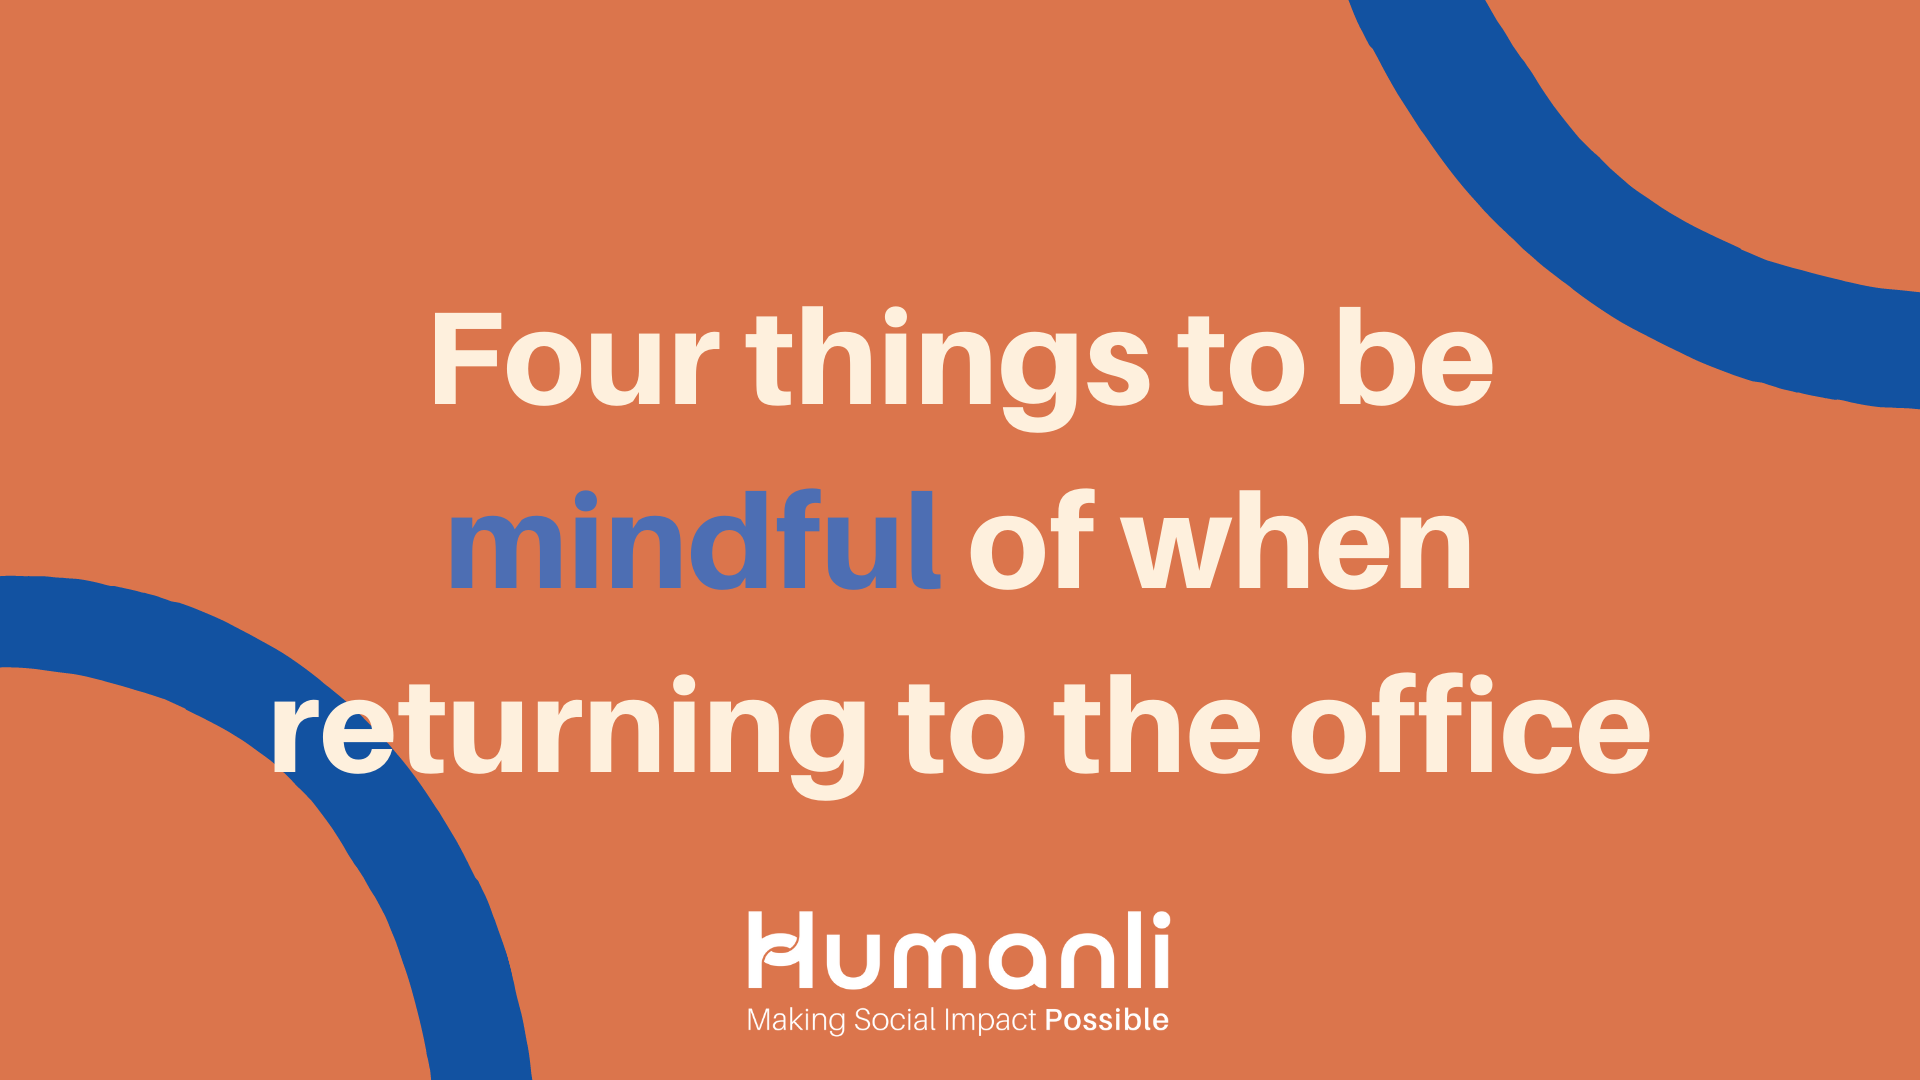 Four things to be mindful of when returning to the office